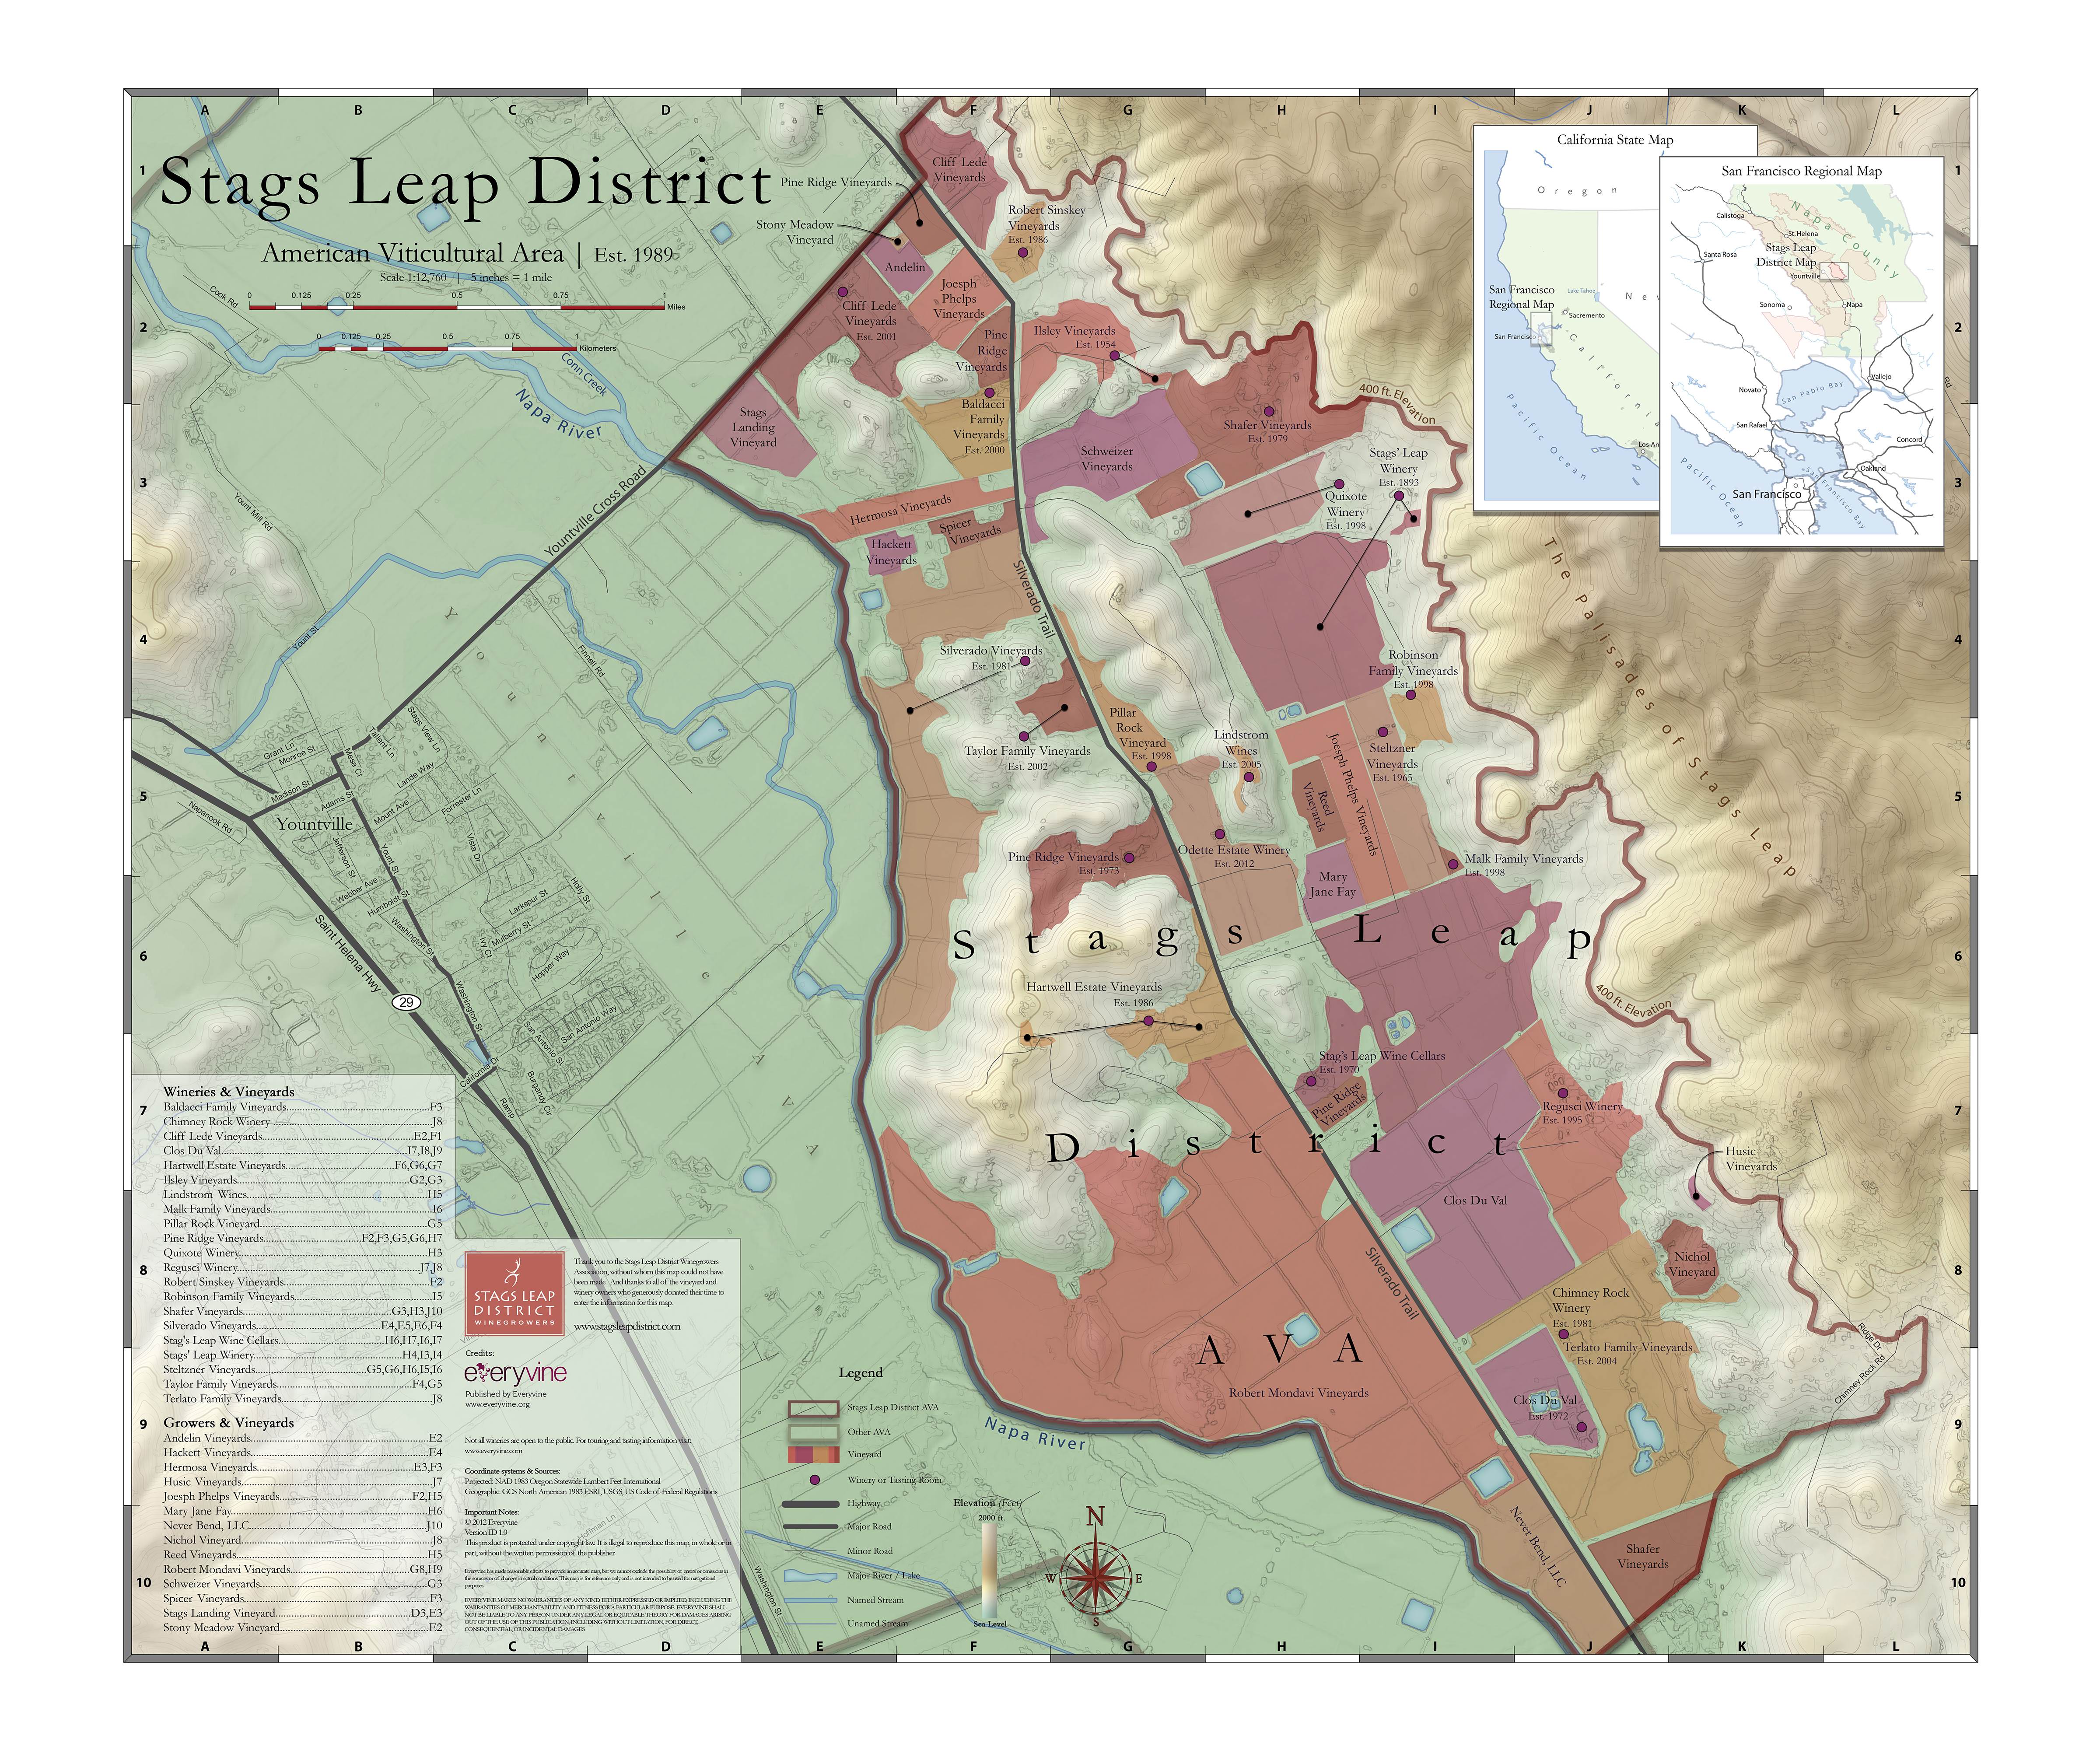 Stags Leap District was the first sub-AVA to be defined completely by soil, climate and natural barriers.